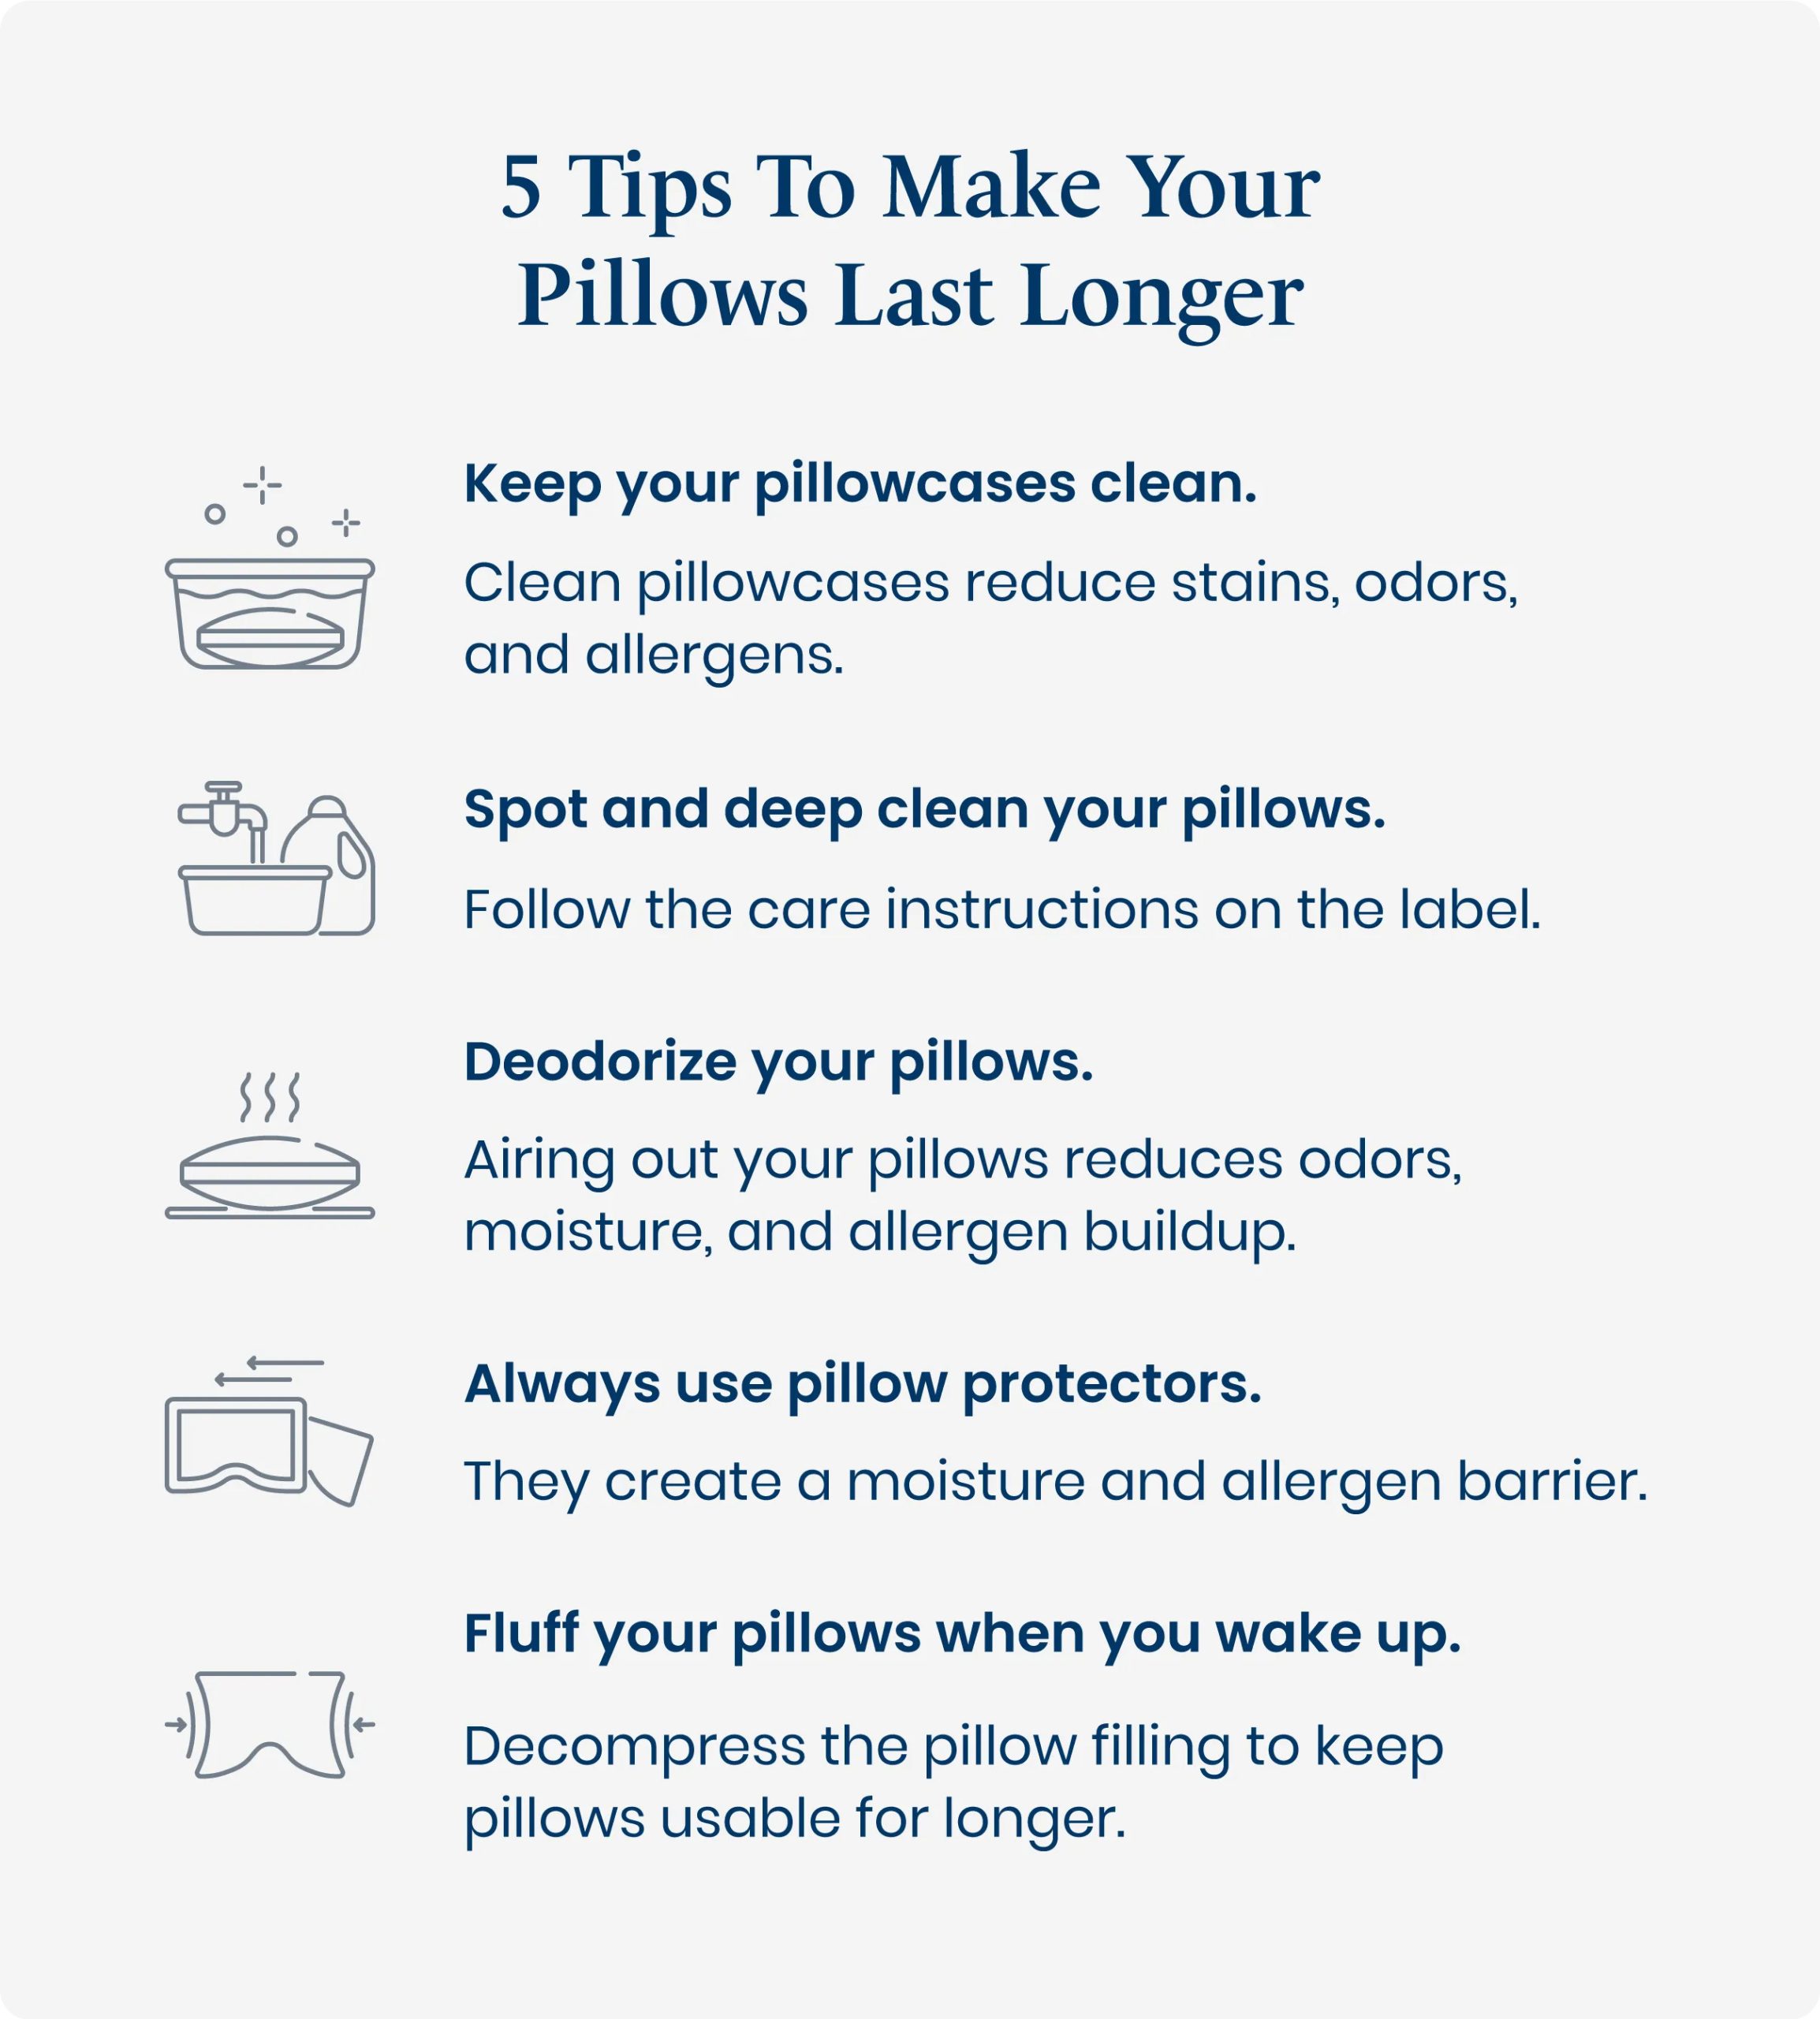 Illustrated chart with tips to make pillows last longer.